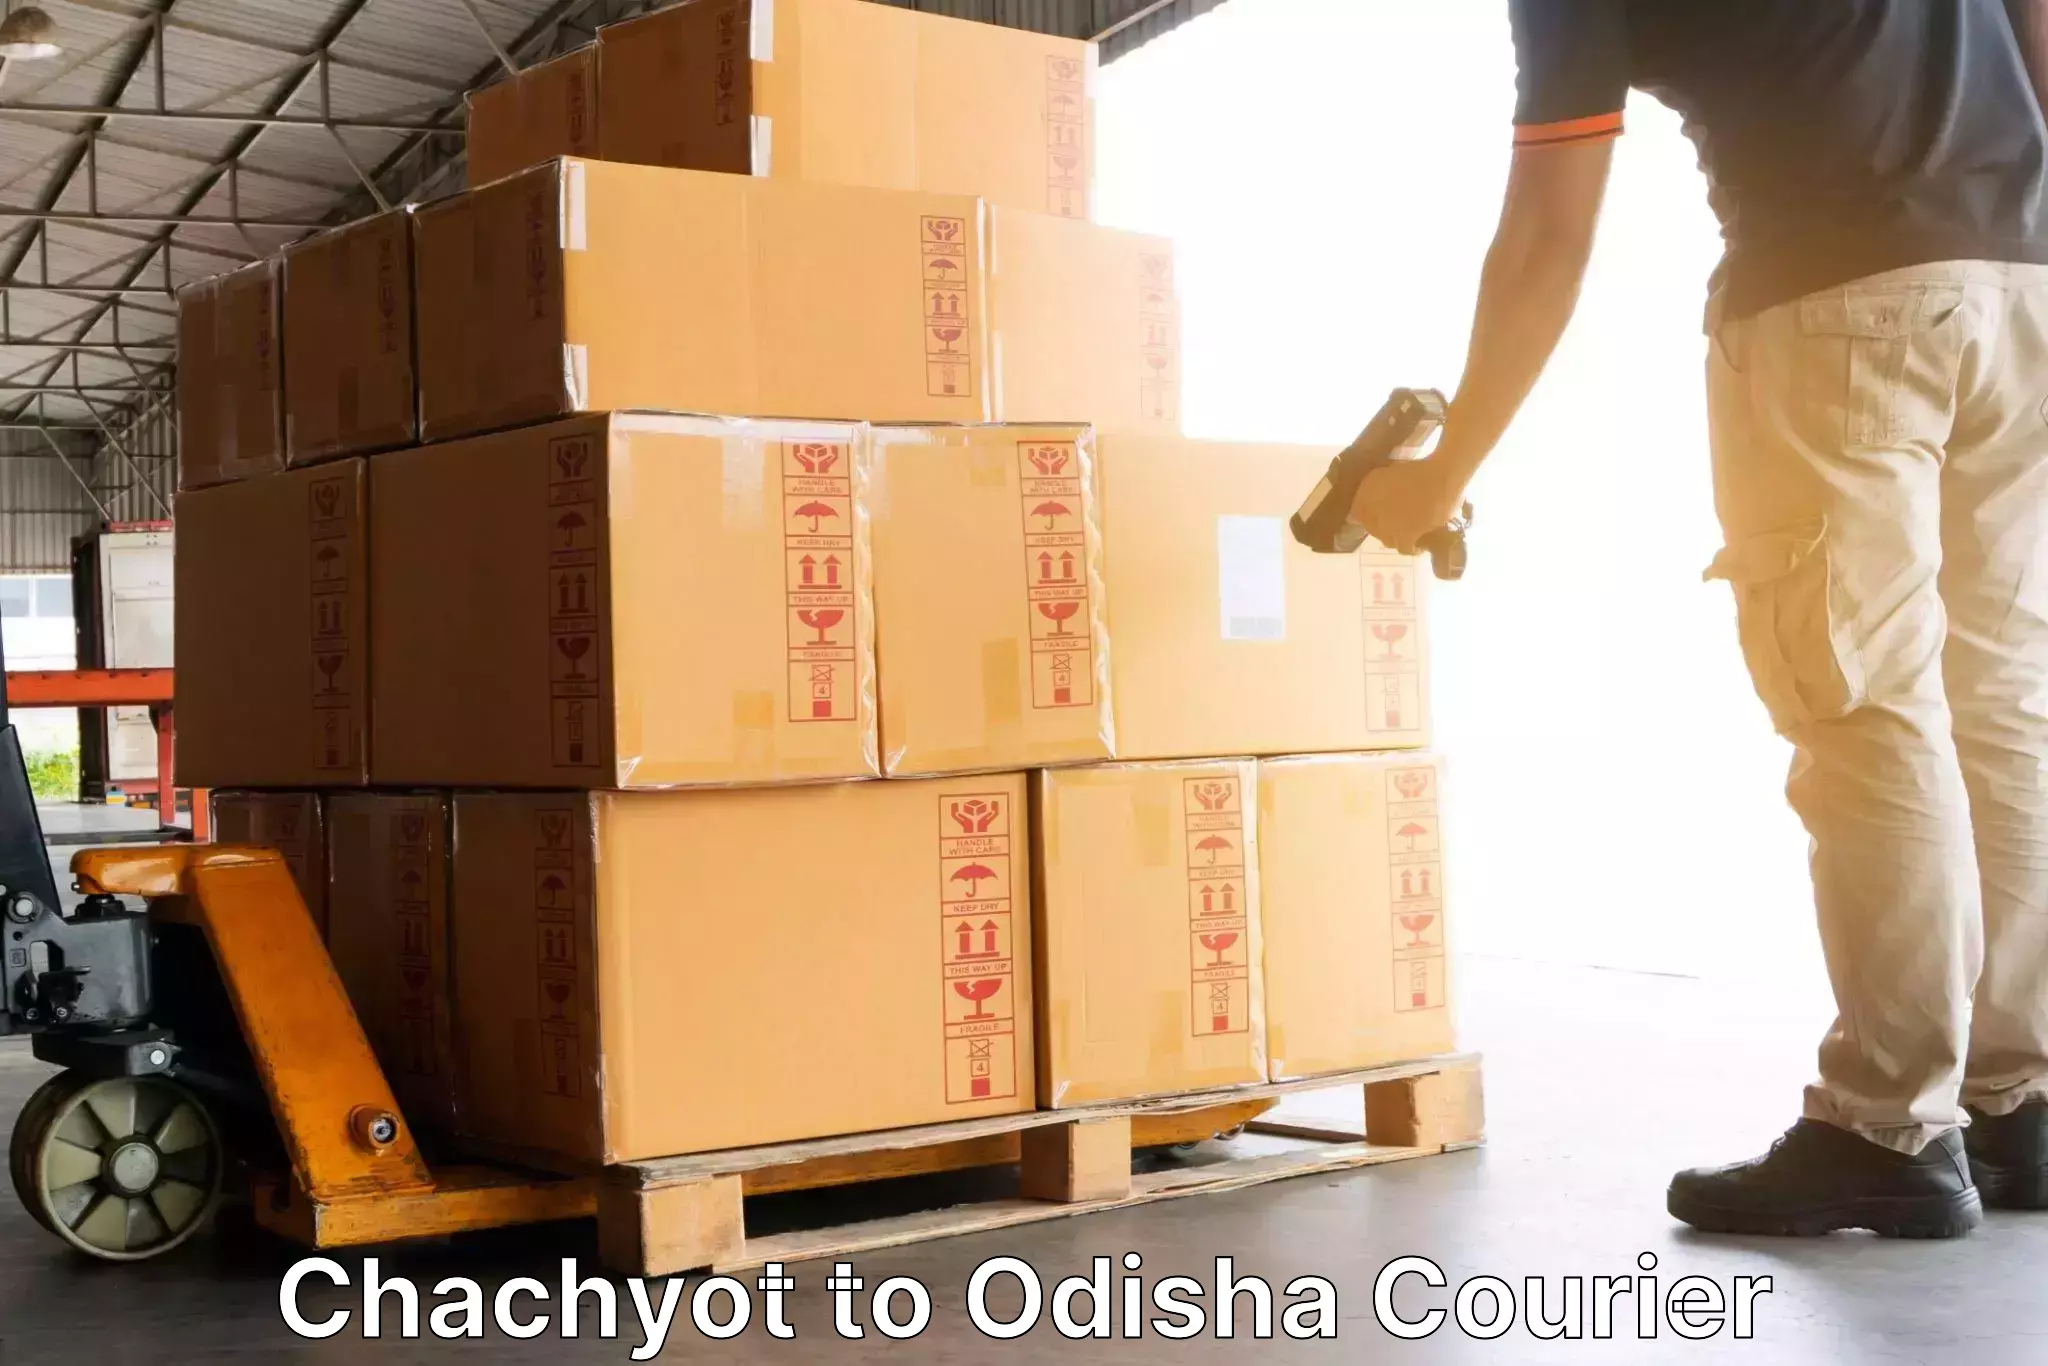 24-hour courier services in Chachyot to Sankerko